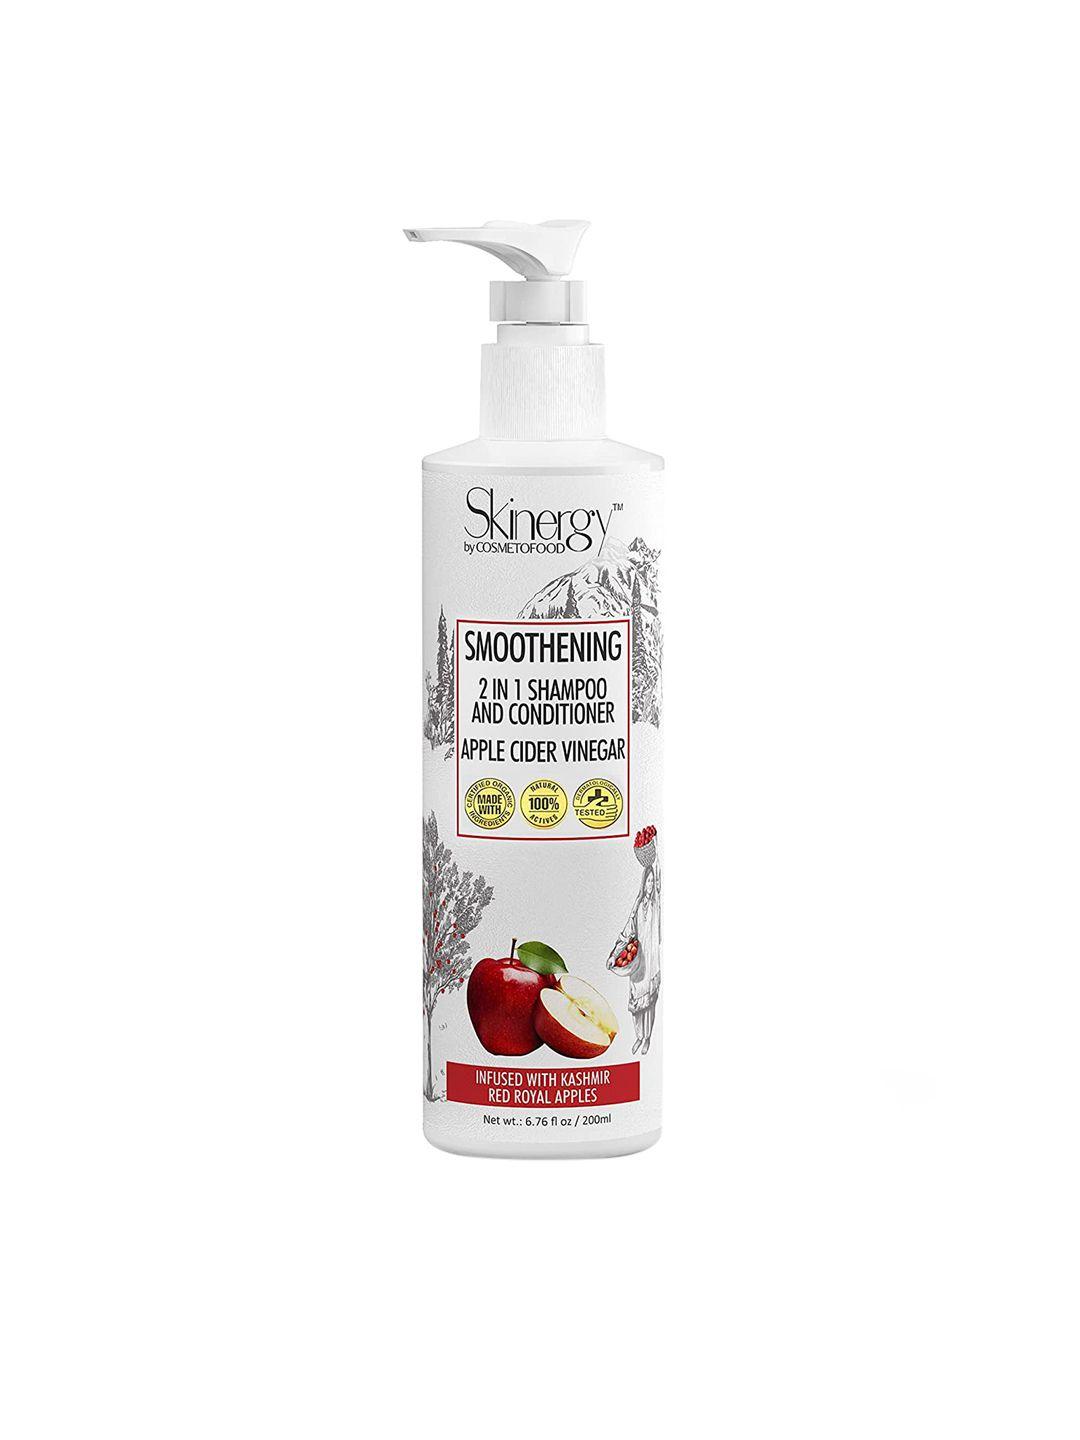 cosmetofood-skinergy-smoothening-2-in-1-shampoo-&-conditioner-apple-cider-vinegar-200ml